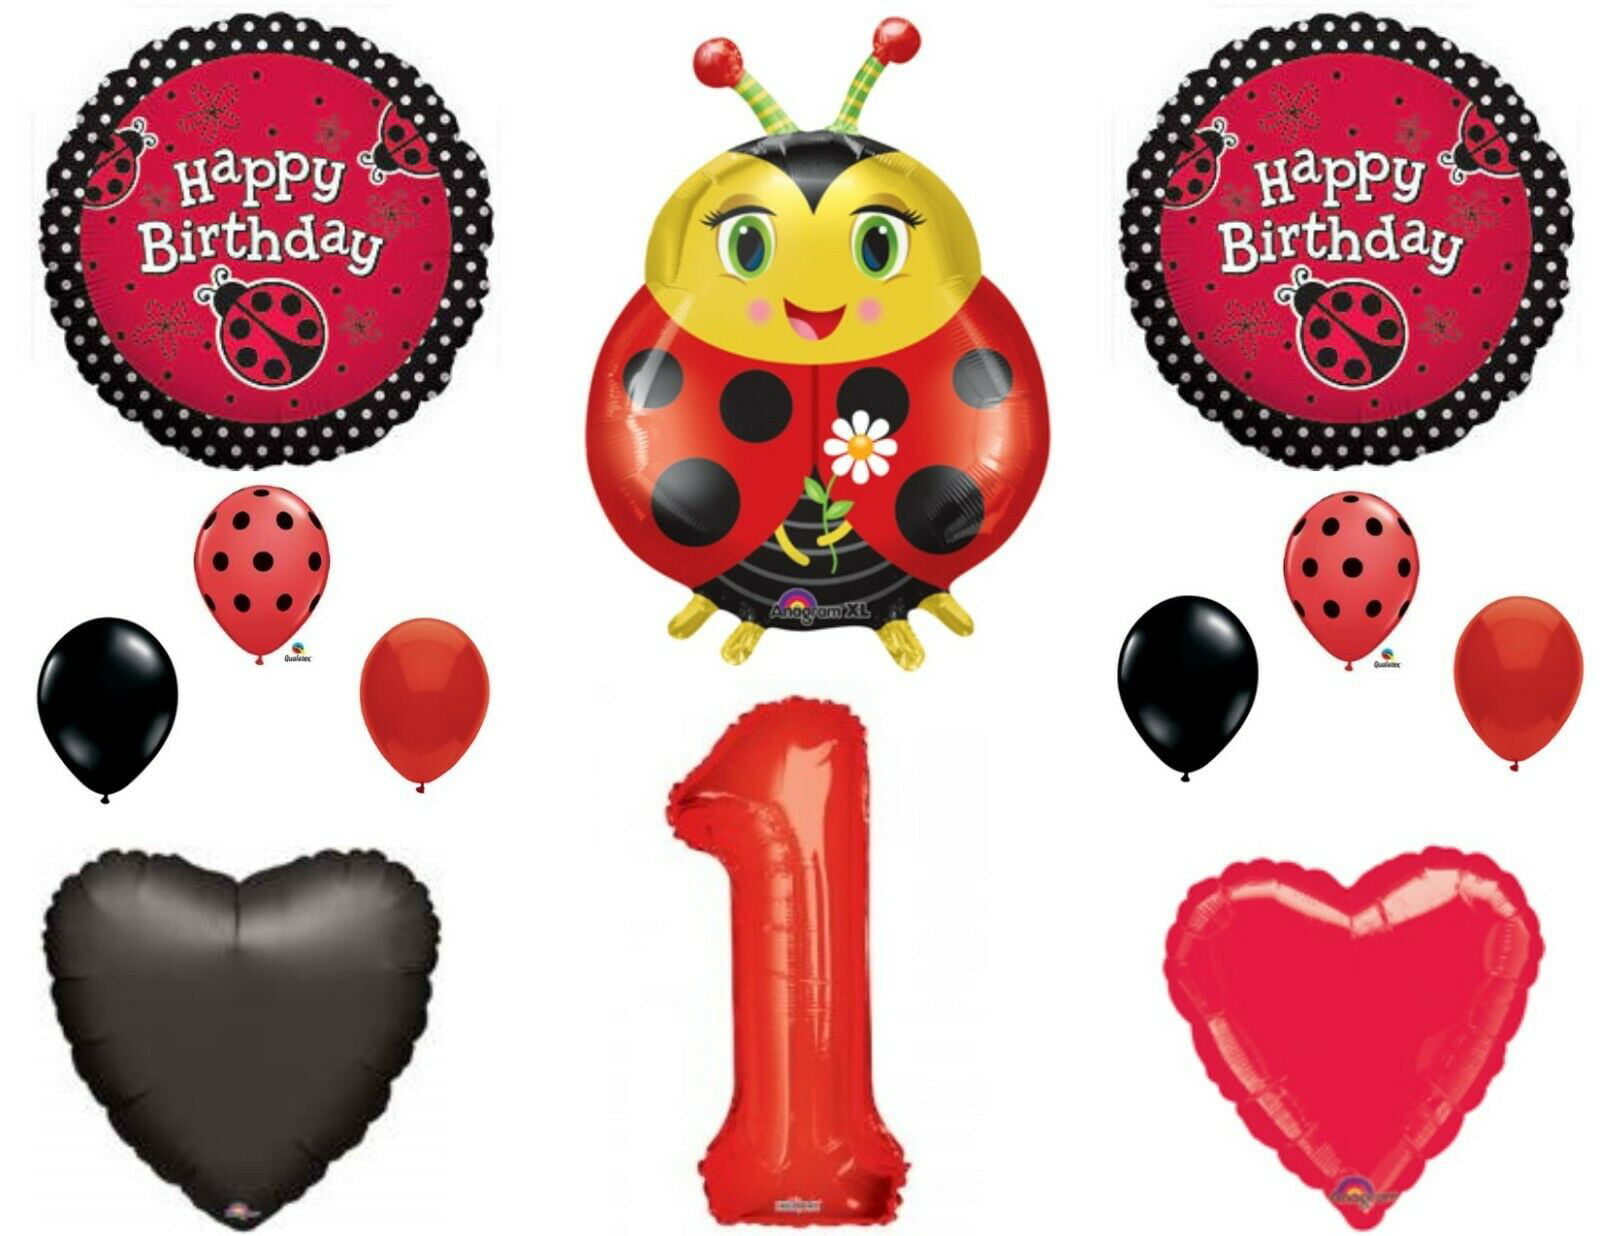 LadyBug Balloon Bouquet 1st Birthday Party Supplies Decorations Favors